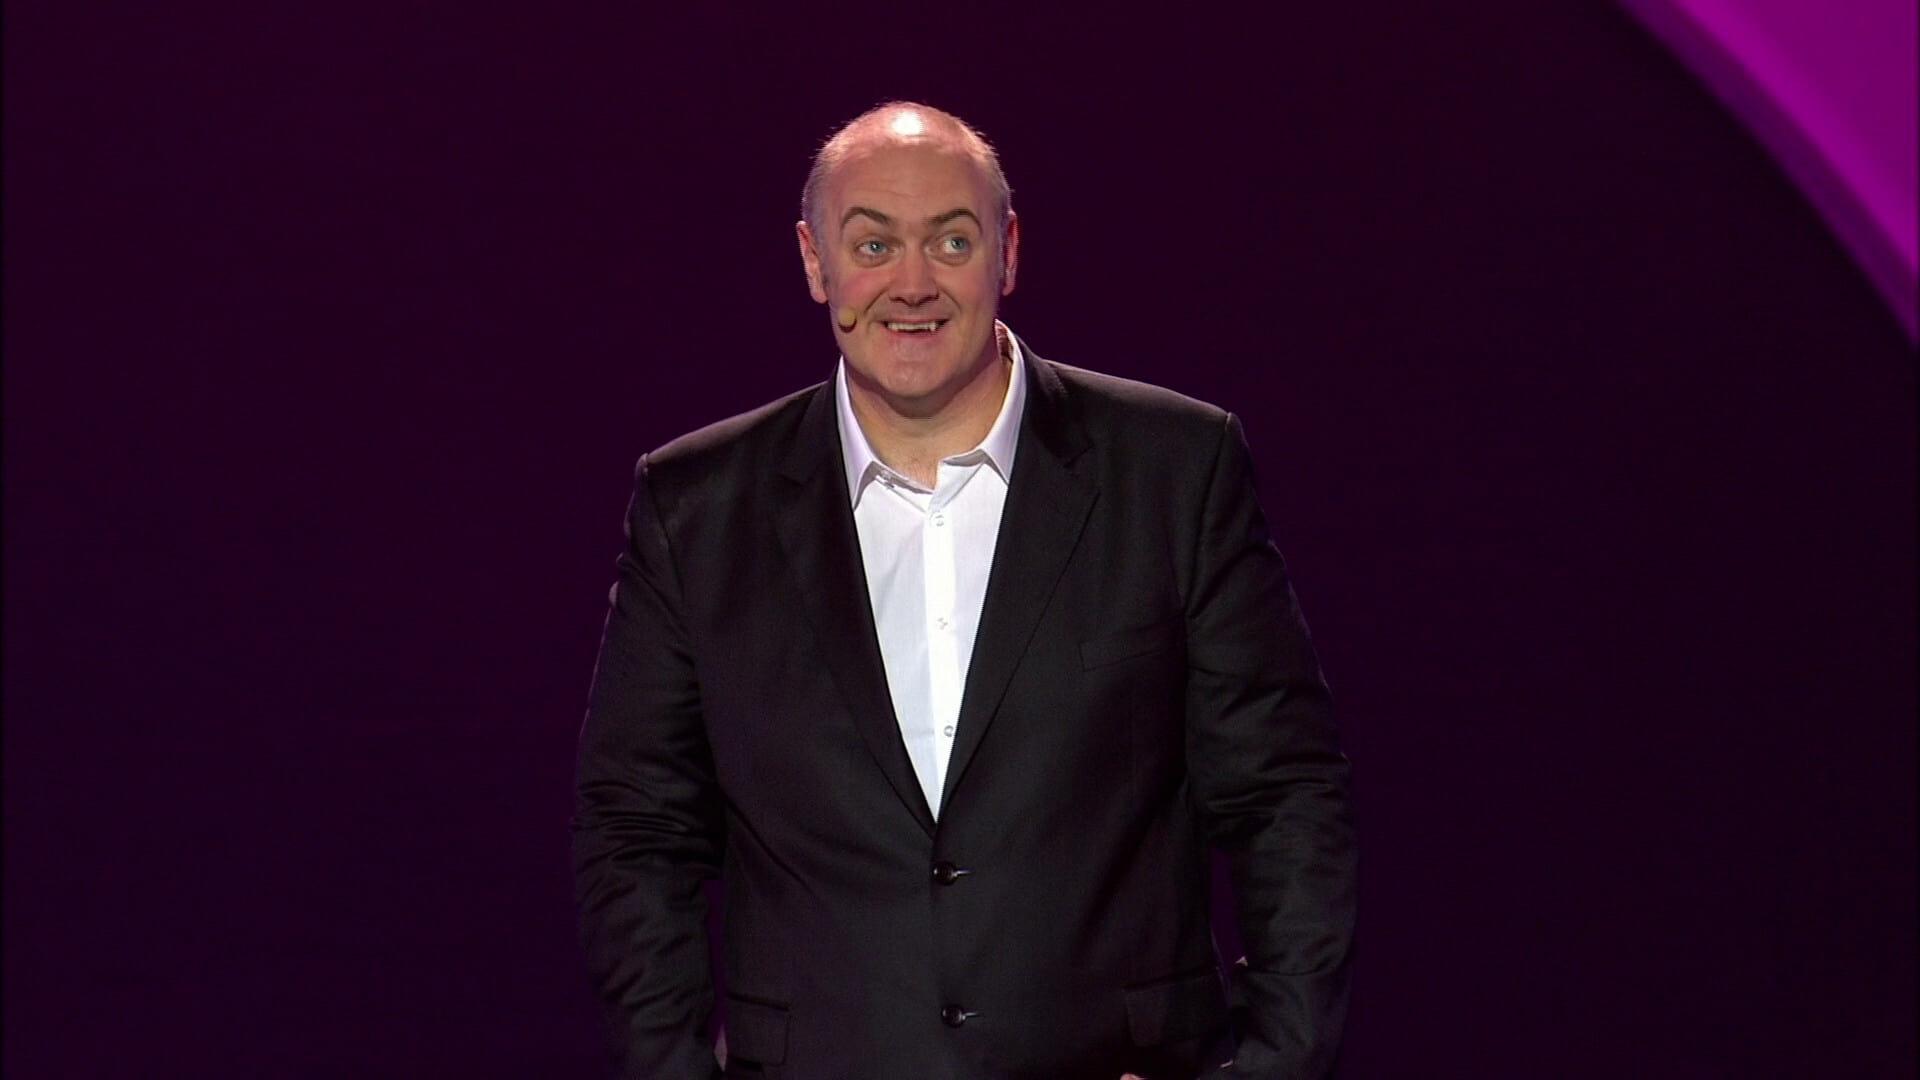 Dara Ó Briain: This Is the Show backdrop